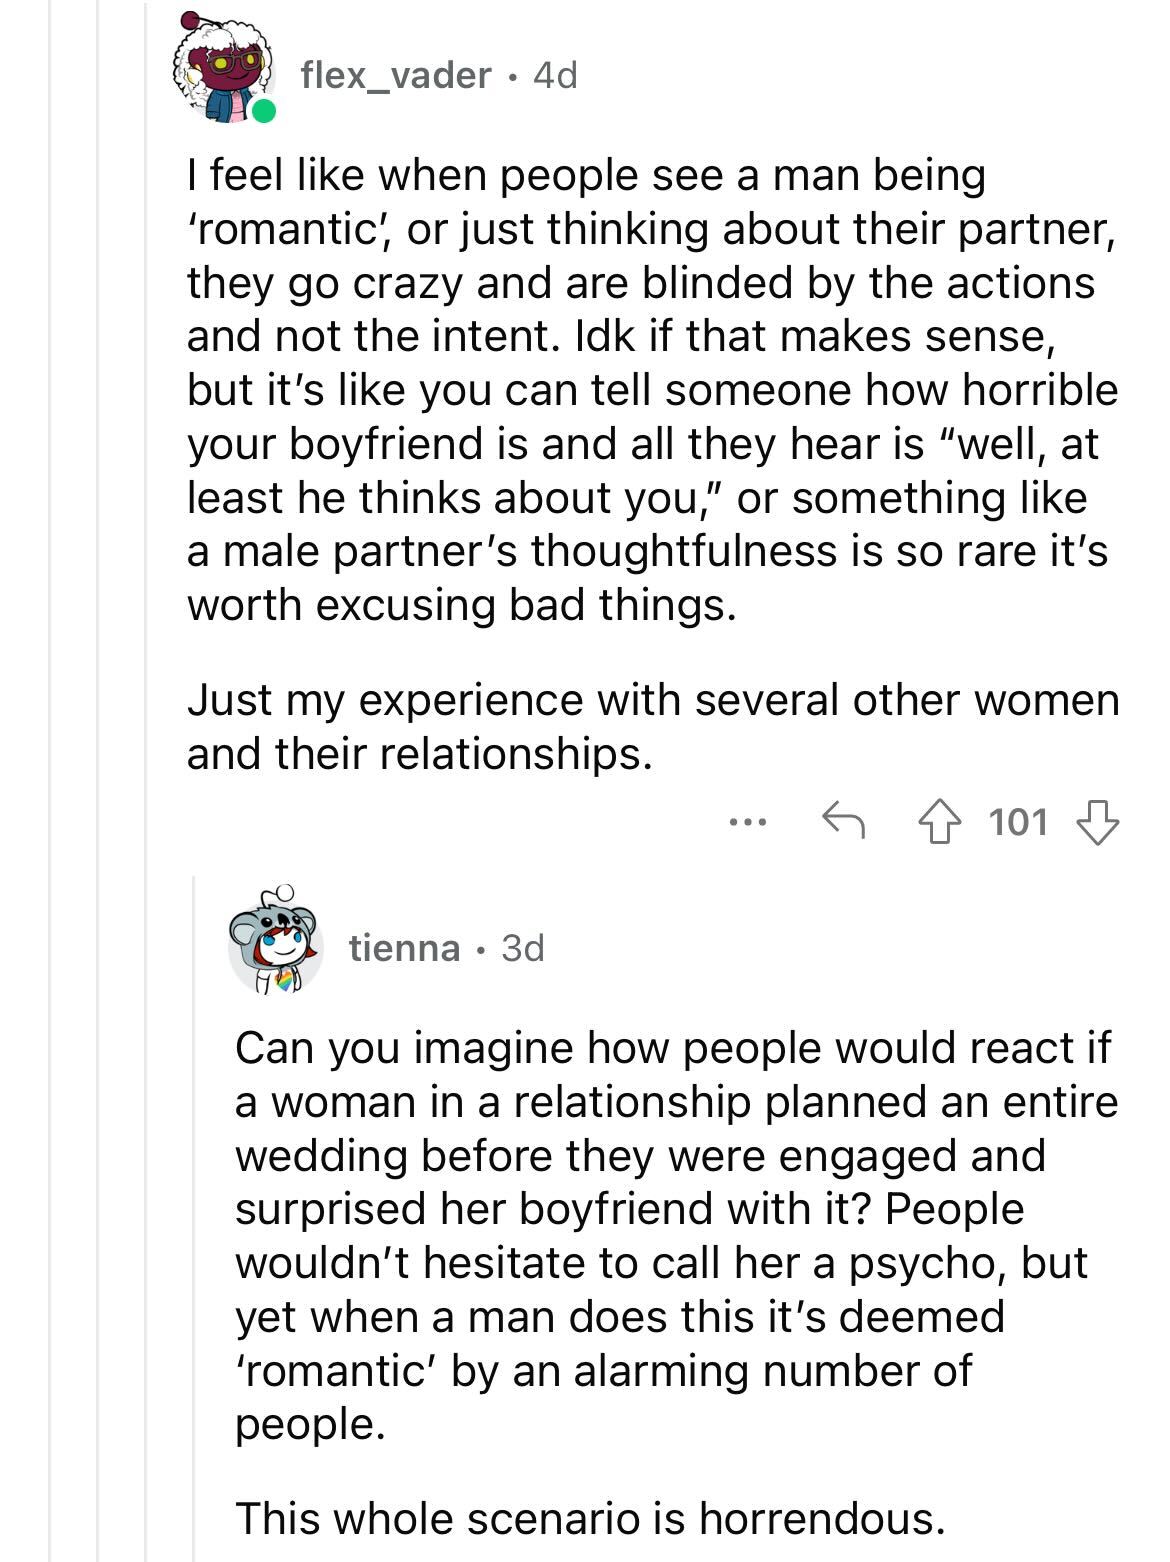 am i the asshole thread on reddit - document - flex_vader 4d I feel when people see a man being 'romantic', or just thinking about their partner, they go crazy and are blinded by the actions and not the intent. Idk if that makes sense, but it's you can te